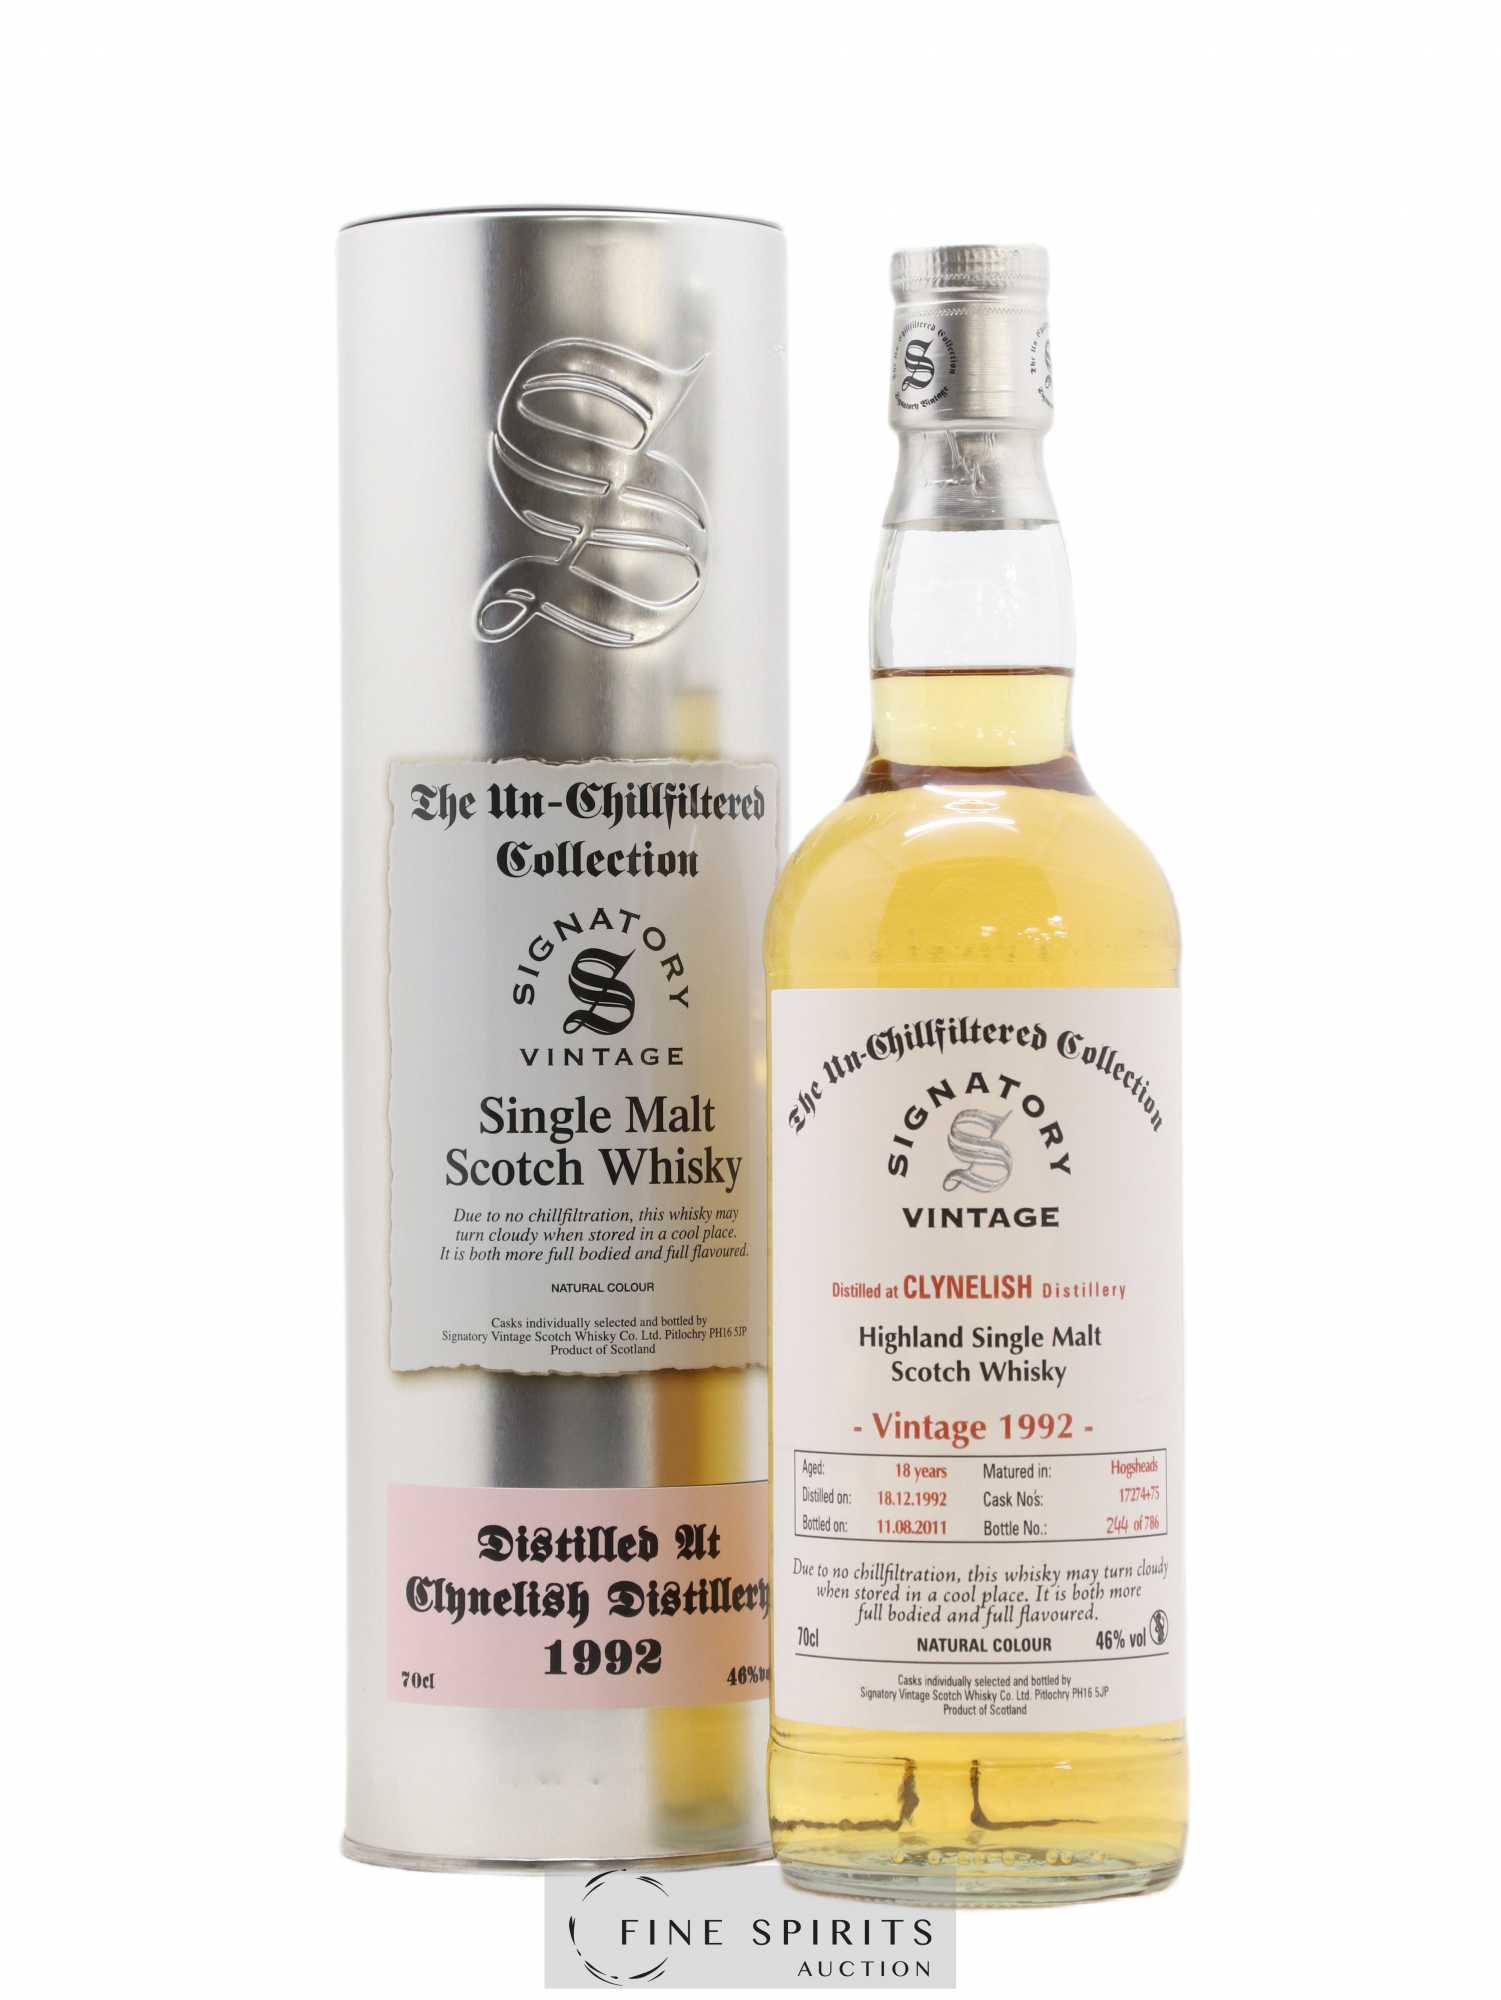 Clynelish 18 years 1992 Signatory Vintage Hogsheads Casks n°17274-75 - One of 786 - bottled 2011 The Un-Chillfiltered Collection 